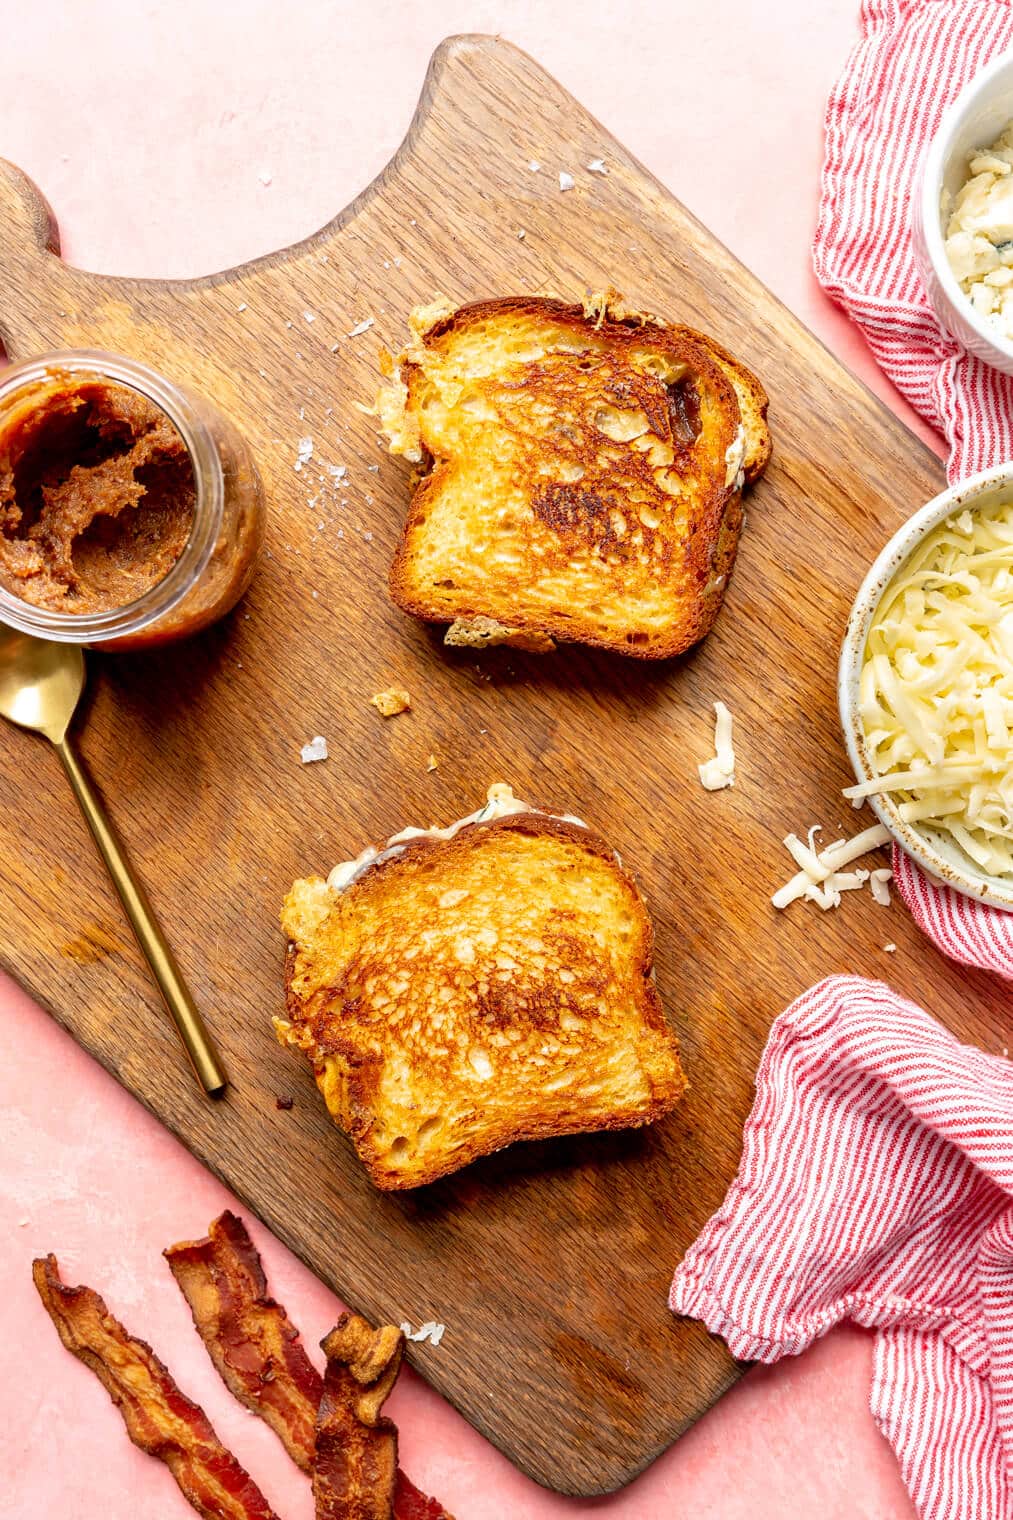 Two grilled cheese sandwiches on a wooden cutting board with a jar of bacon jam, bowl of sauerkraut, and slices of bacon.